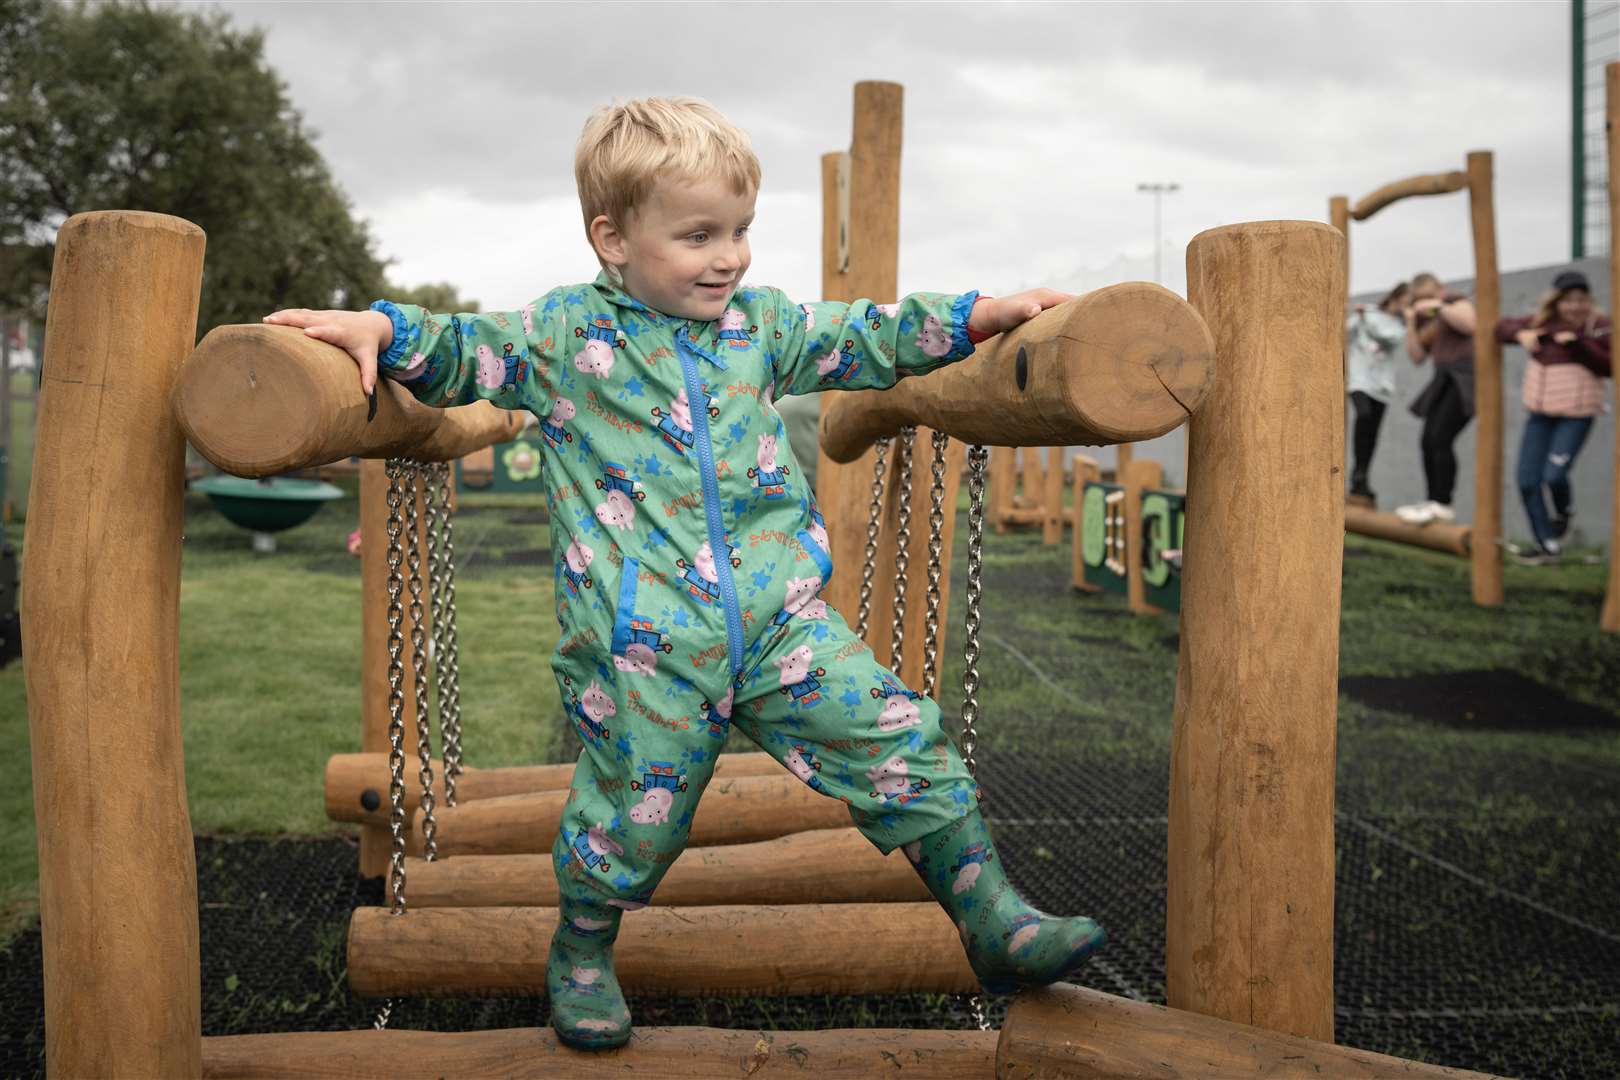 The equipment in the last phase of the play park was designed with younger children in mind. Picture: Ewen Pryde